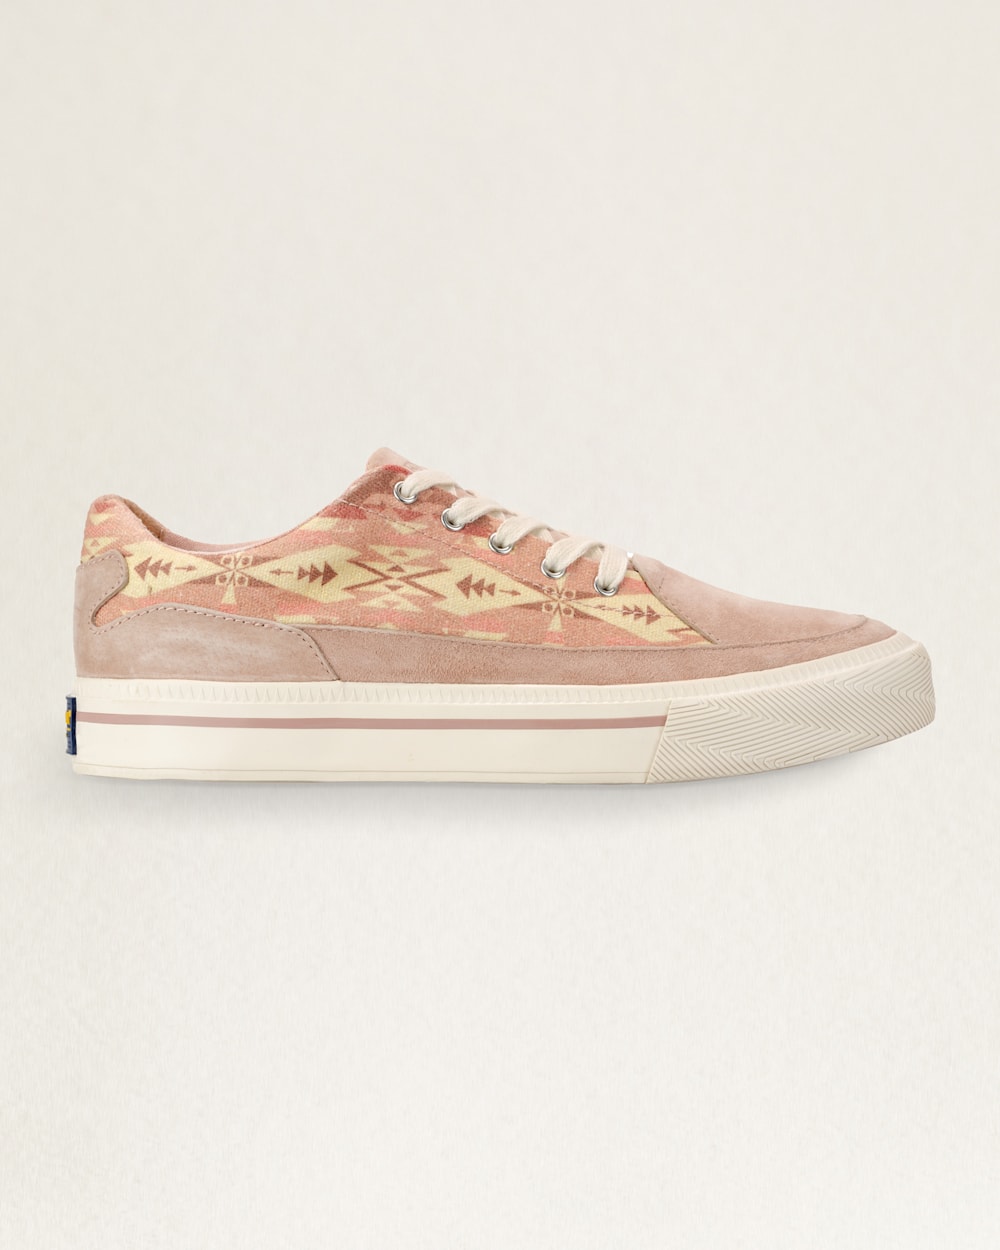 ALTERNATE VIEW OF WOMEN'S VULCANIZED SNEAKERS IN ROSE TUCSON image number 3